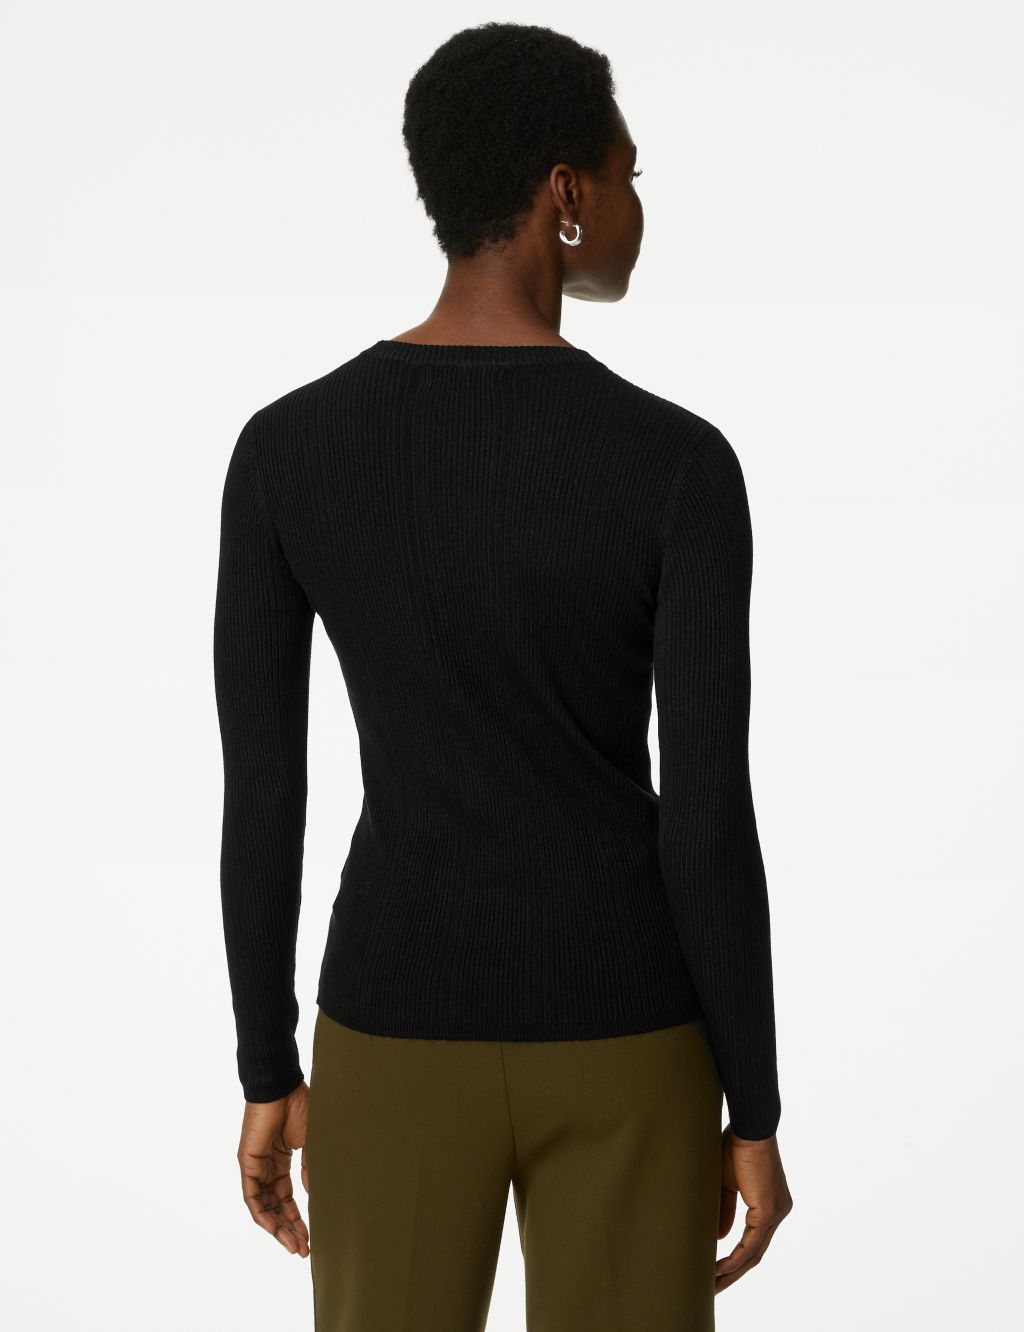 Ribbed Crew Neck Fitted Knitted Top image 5